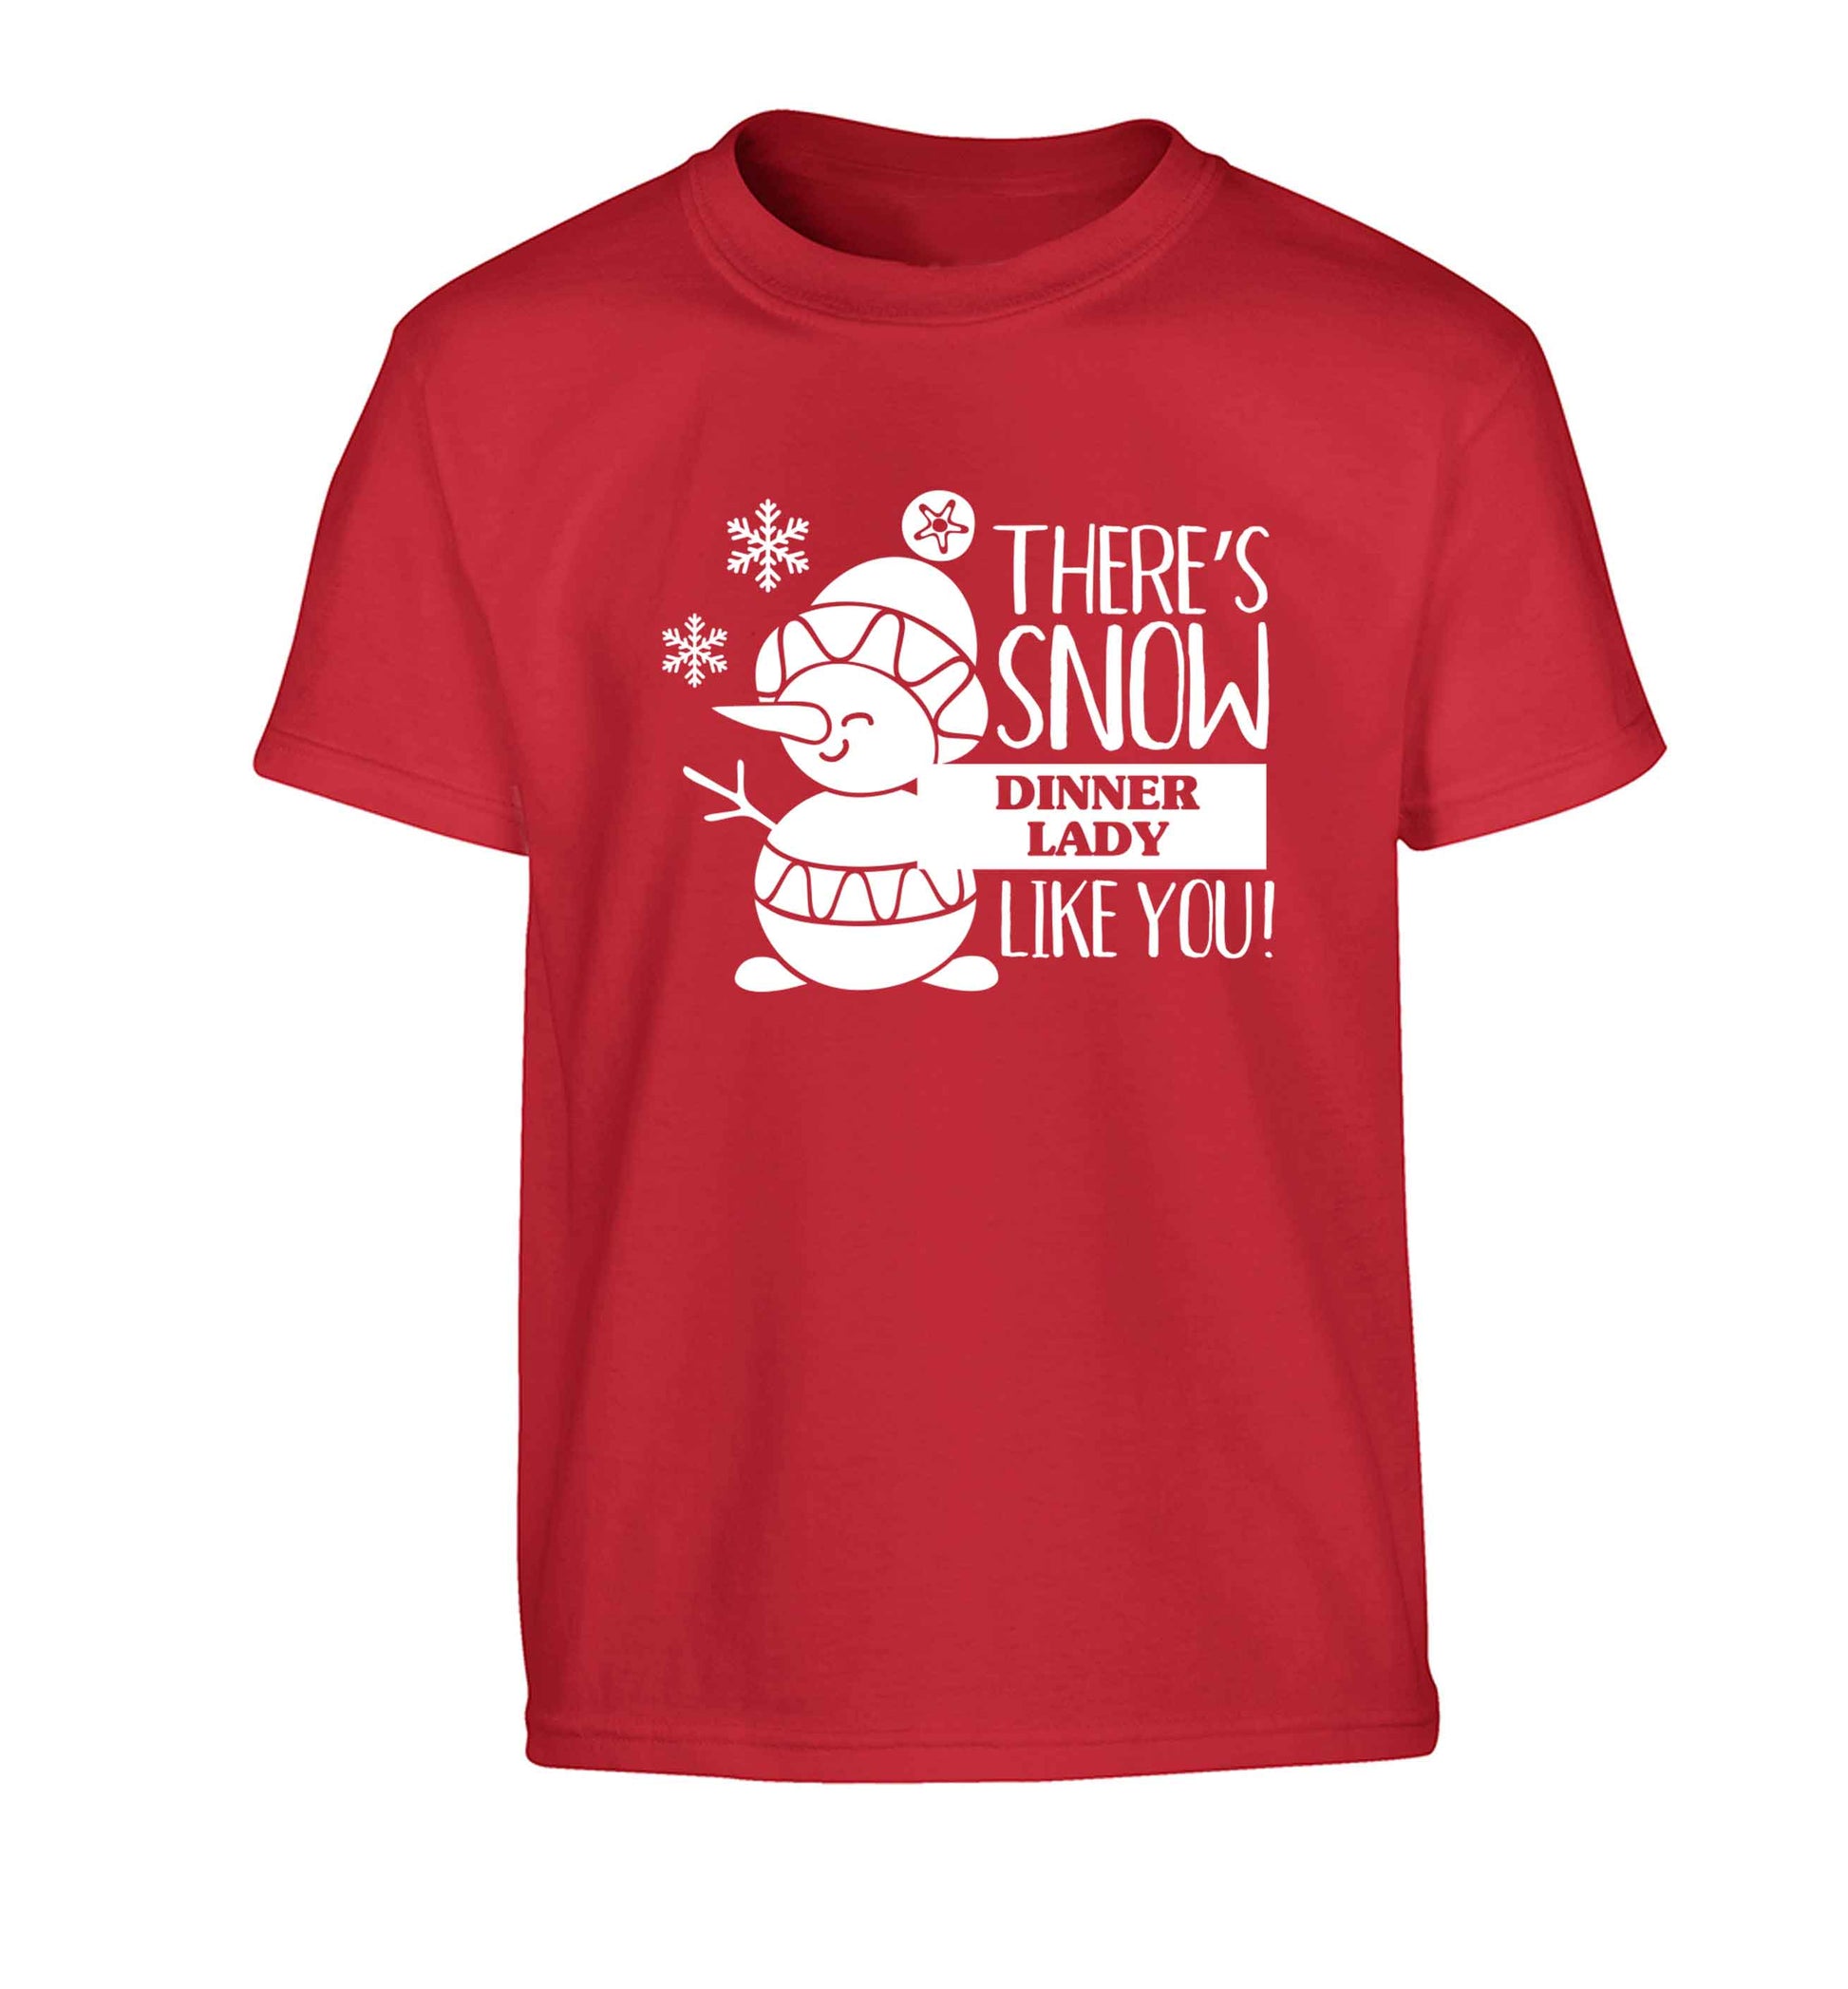 There's snow dinner lady like you Children's red Tshirt 12-13 Years